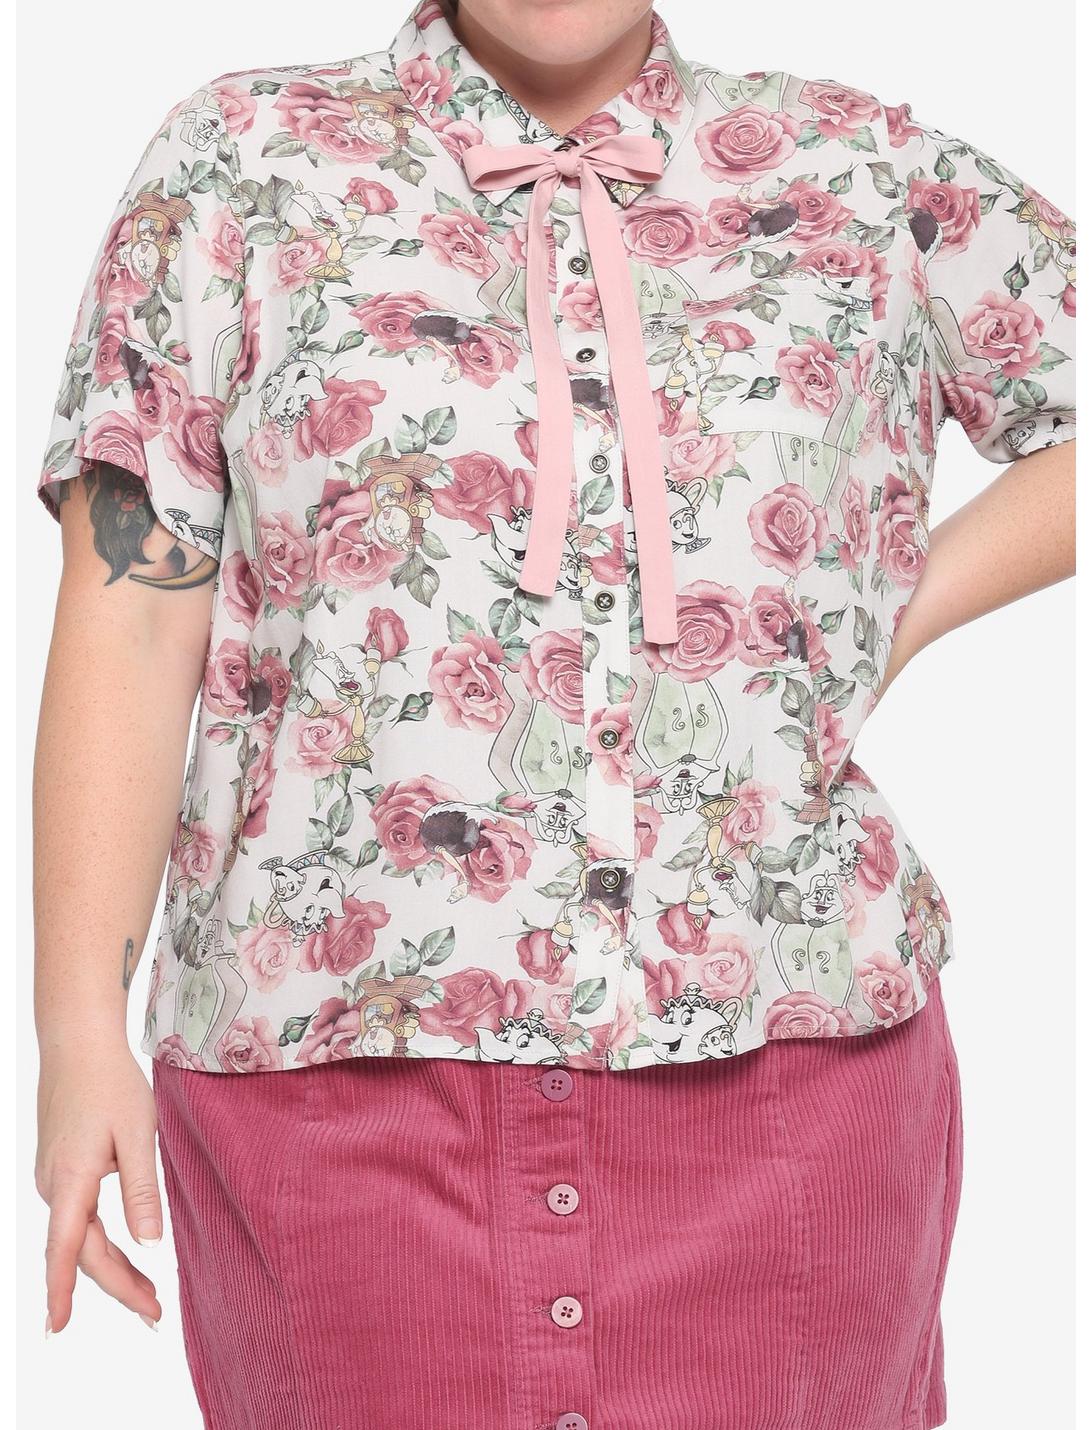 Disney Beauty & The Beast Rose Girls Woven Button-Up Plus Size, MULTI, hi-res